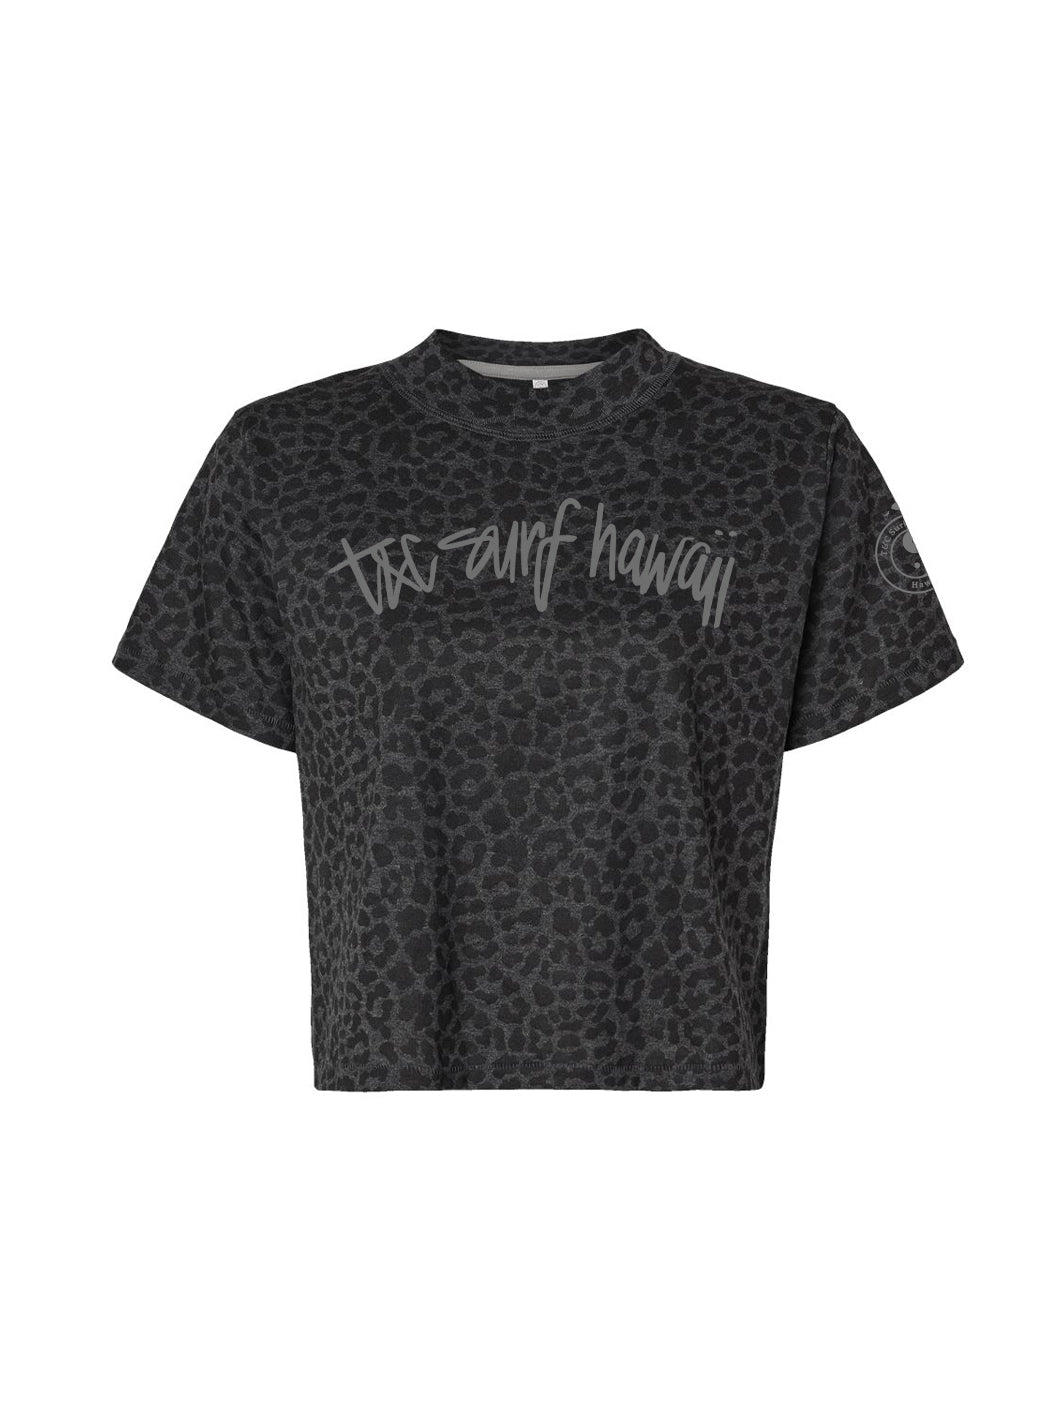 T&C Surf Freehand Boxy Tee